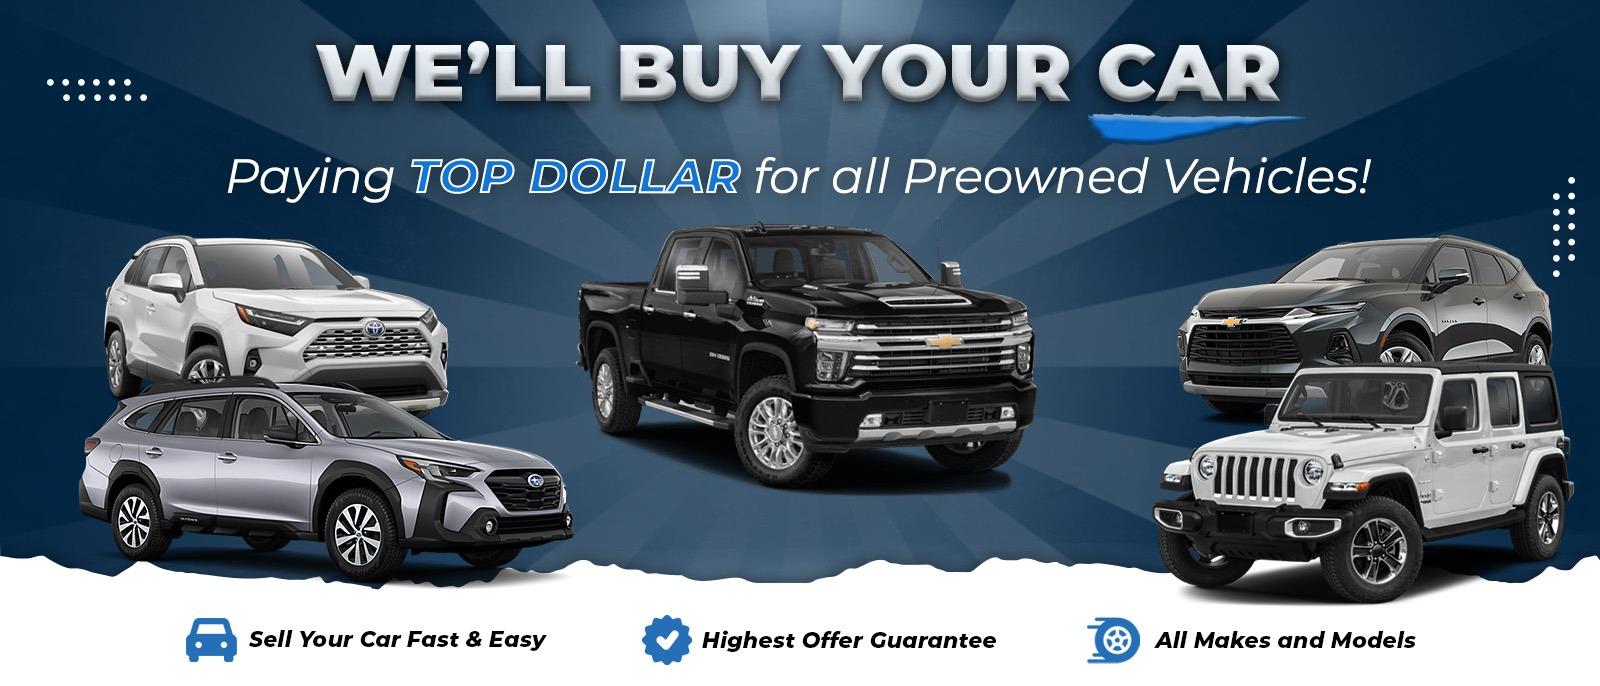 Paying Top Dollar for all Preowned Vehicles